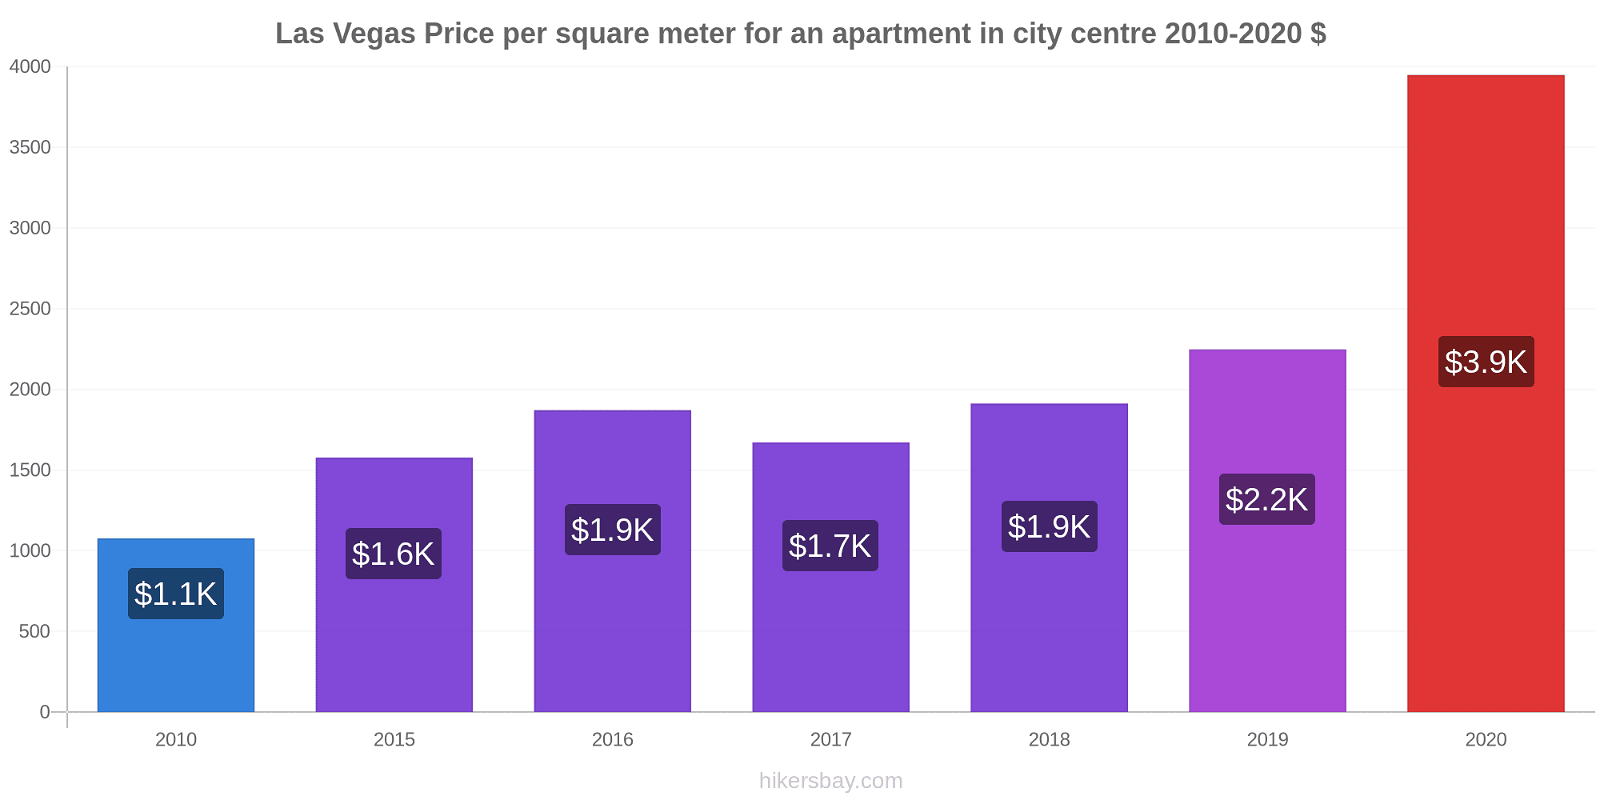 Las Vegas price changes Price per square meter for an apartment in city centre hikersbay.com